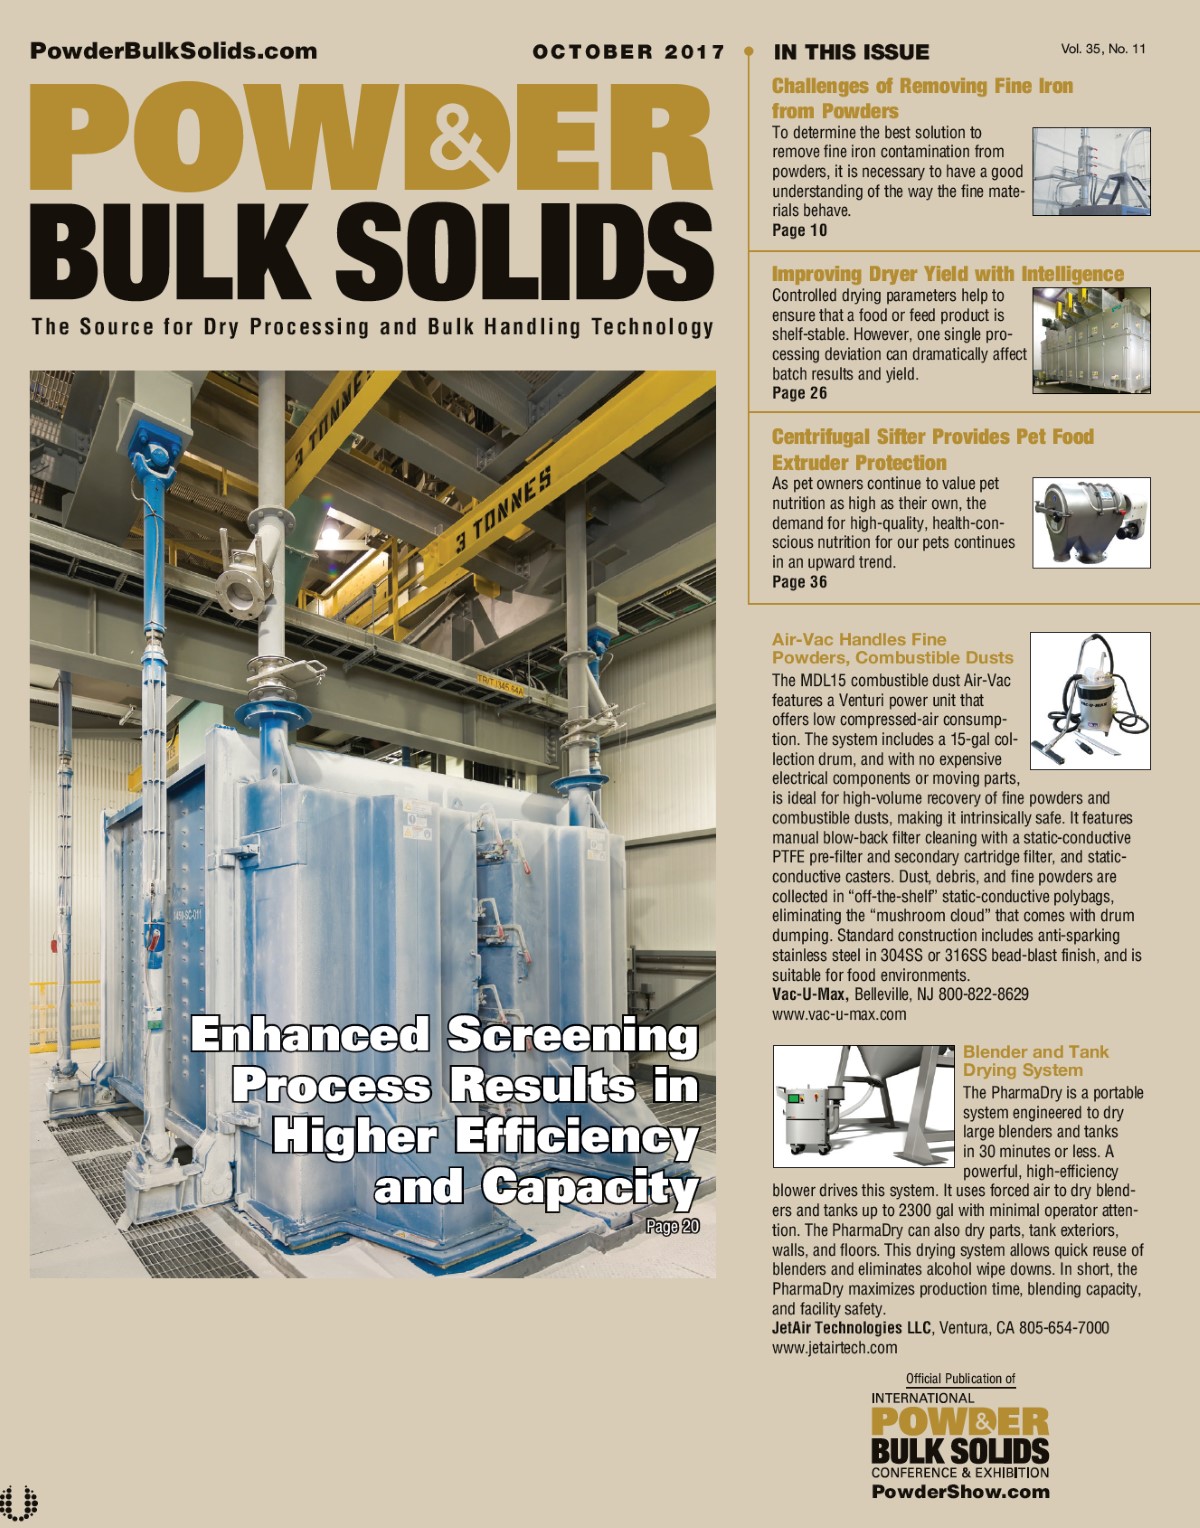 Powder & Bulk Solids magazine cover with Rotex Mineral Separator case study